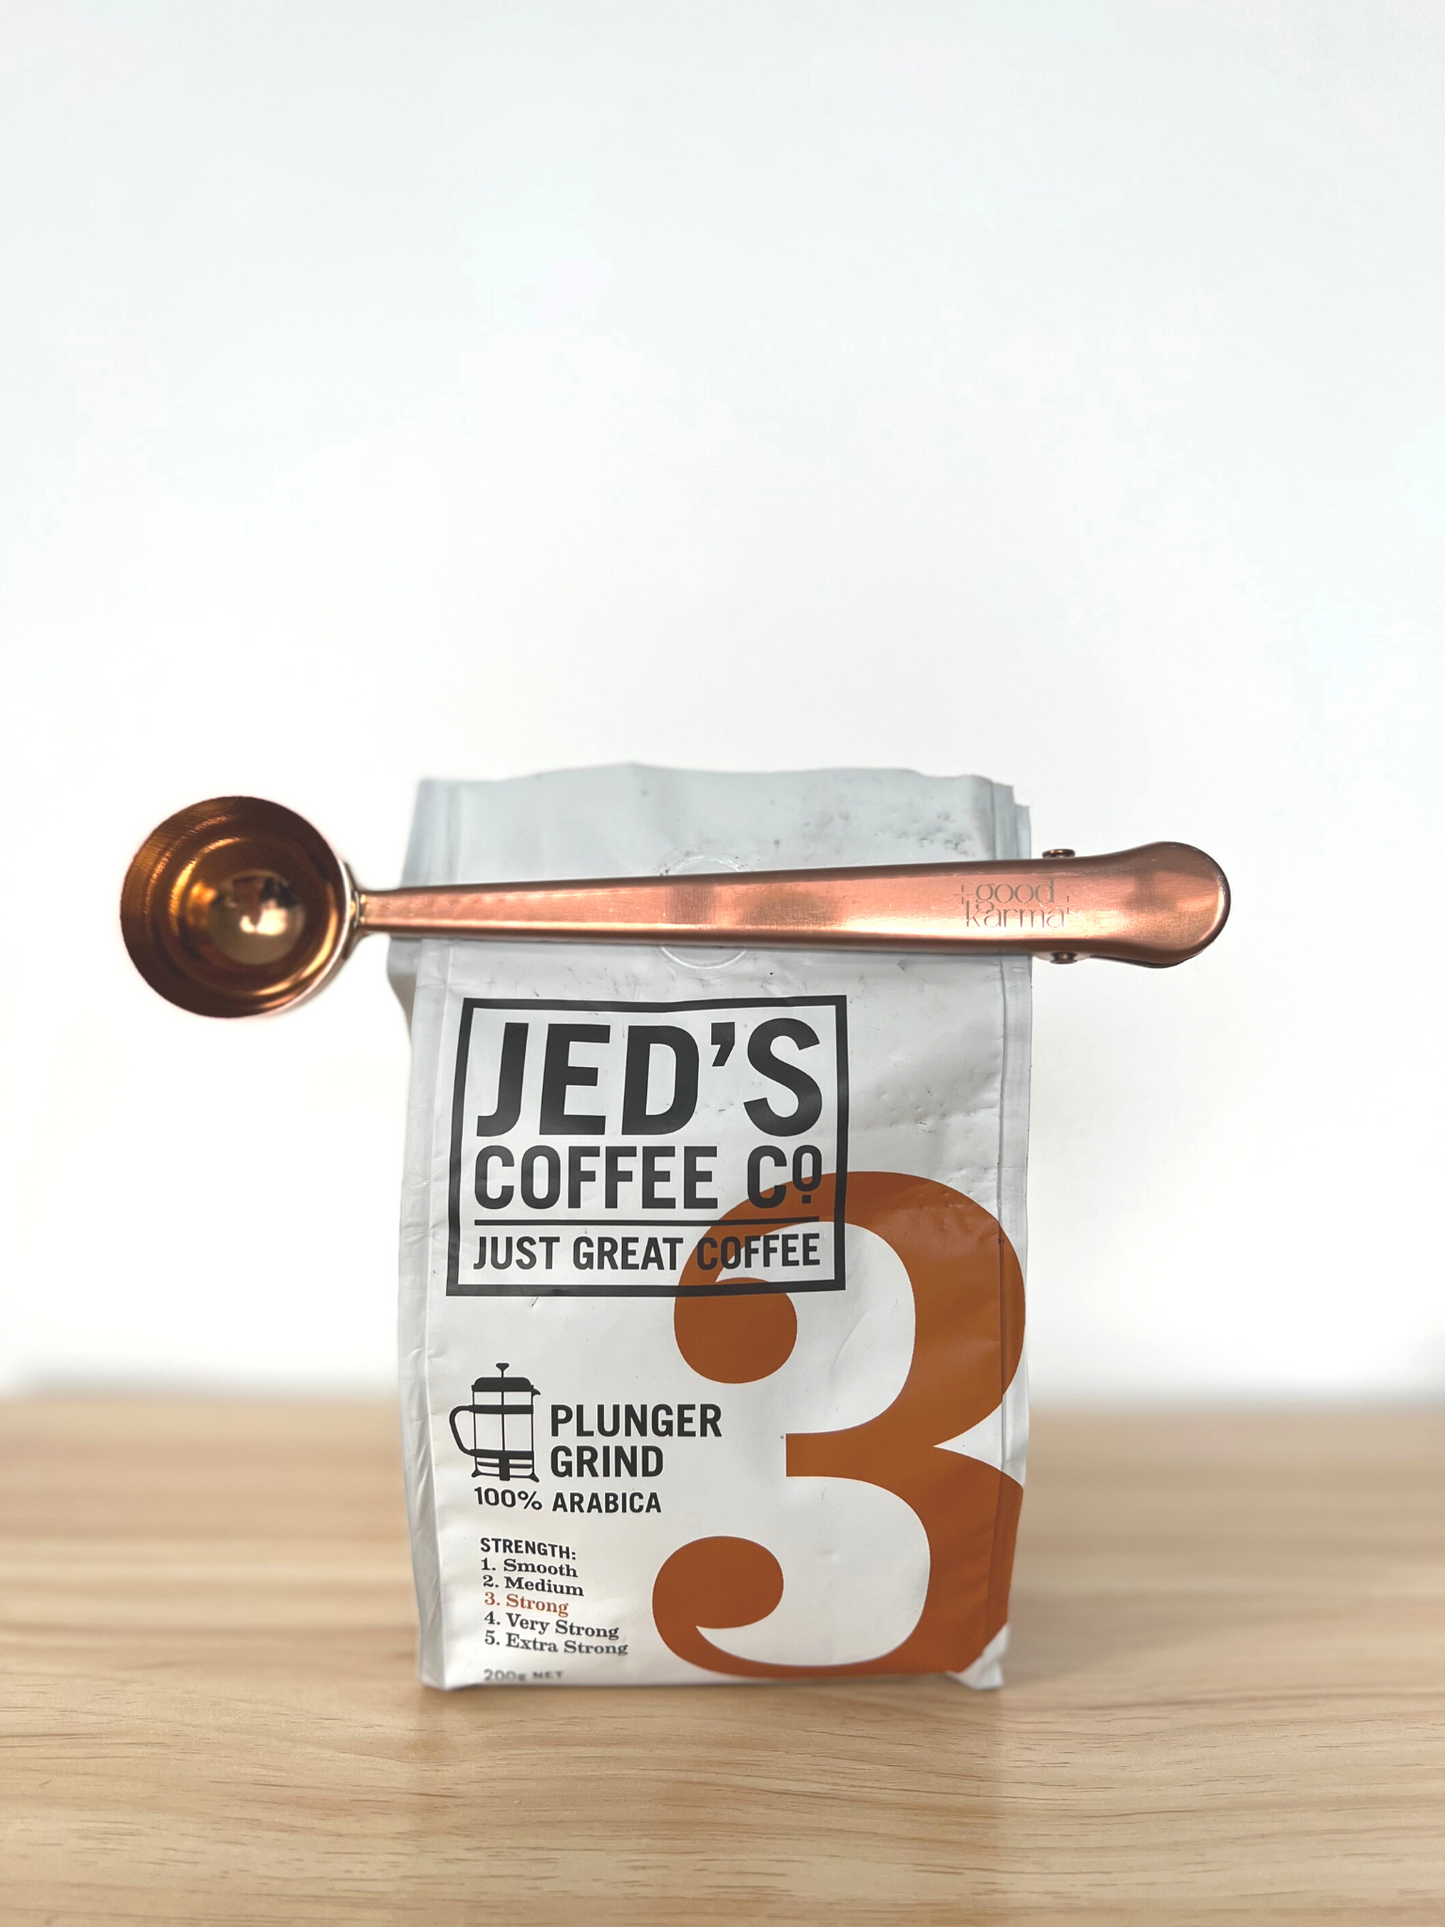 Good Karma Measuring Spoon Scoop With a Clip Stainless Steal Copper Color on Jed's Coffee bag